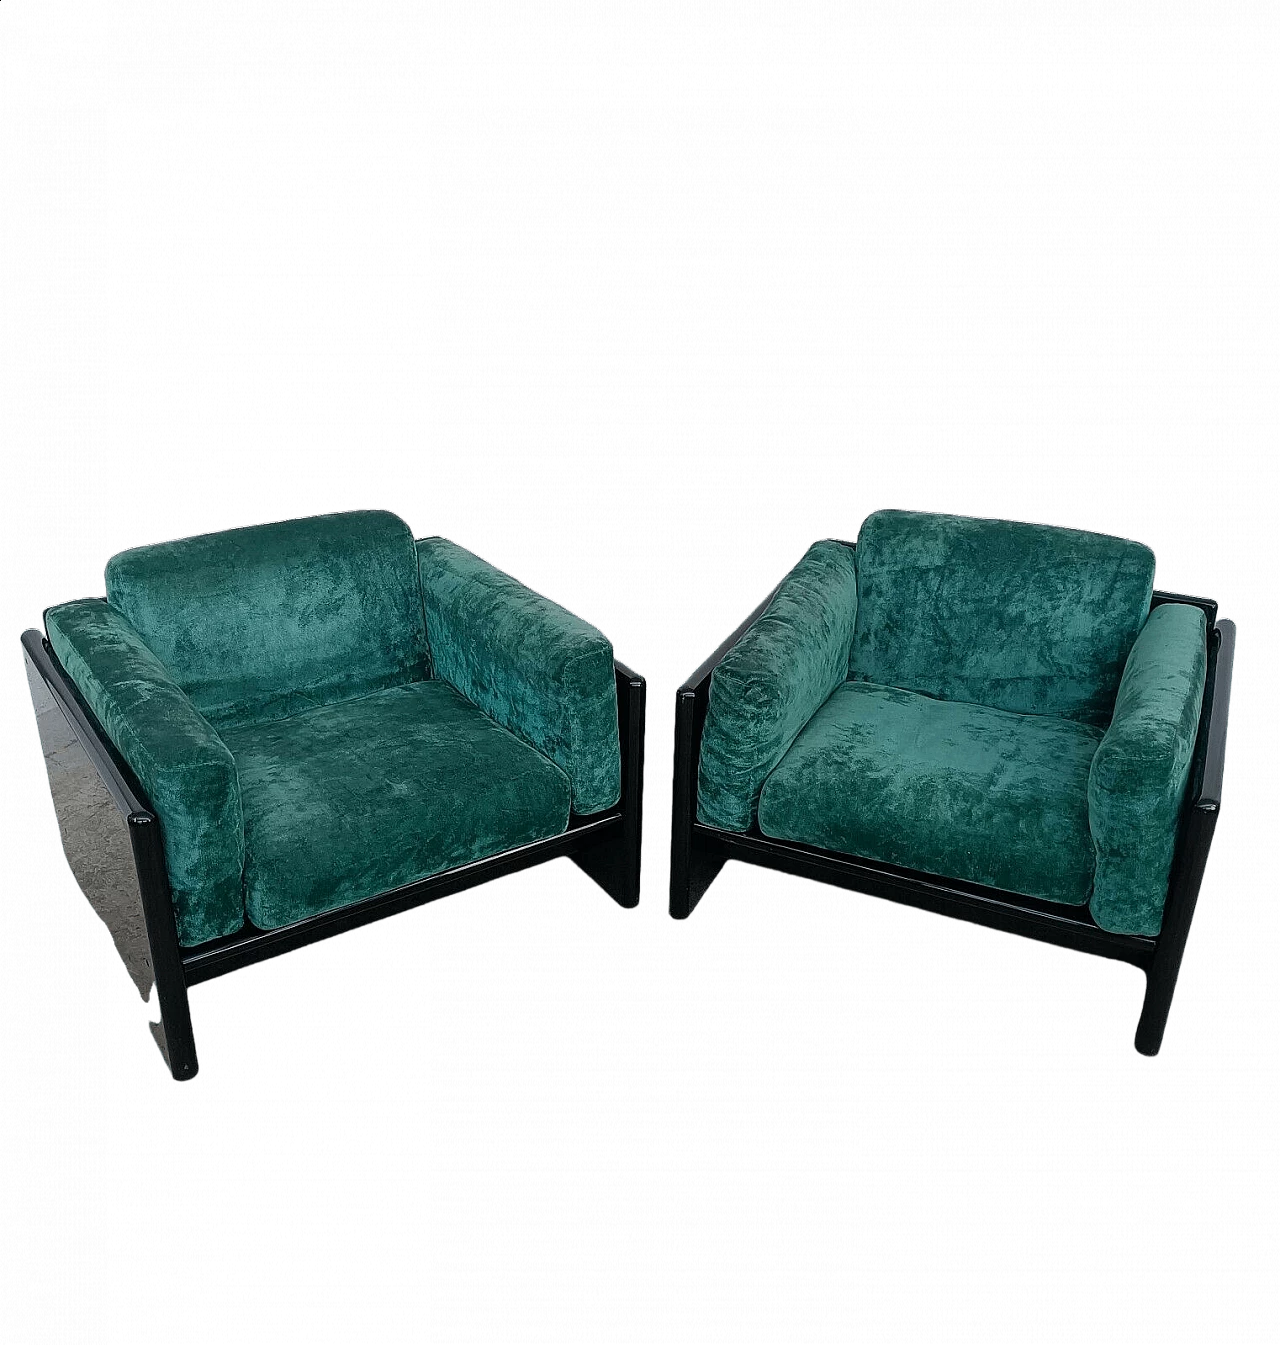 Pair of lacquered and velvet Simone armchairs, by Kazuhide Takahama, 1970s. 10